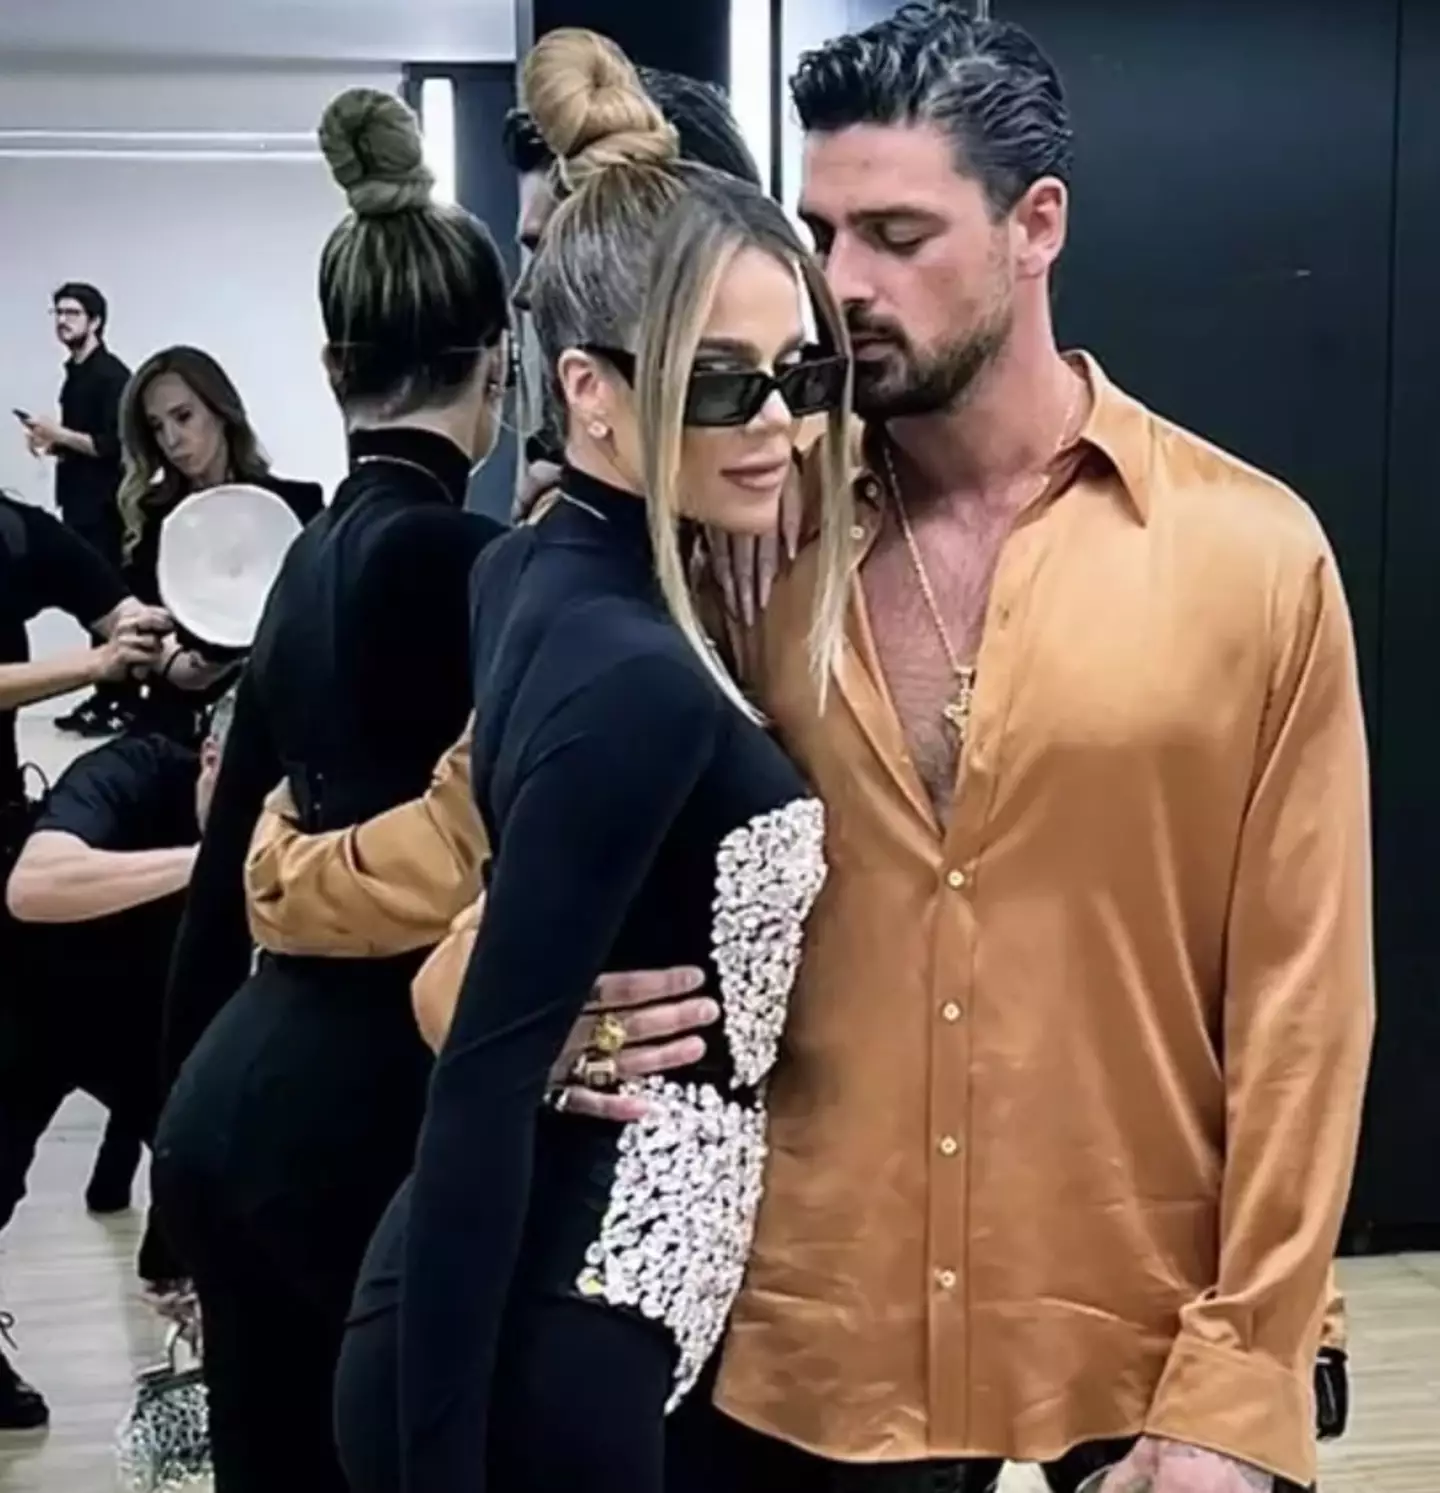 Khloe Kardashian and Michele Morrone got people talking with this saucy snap.